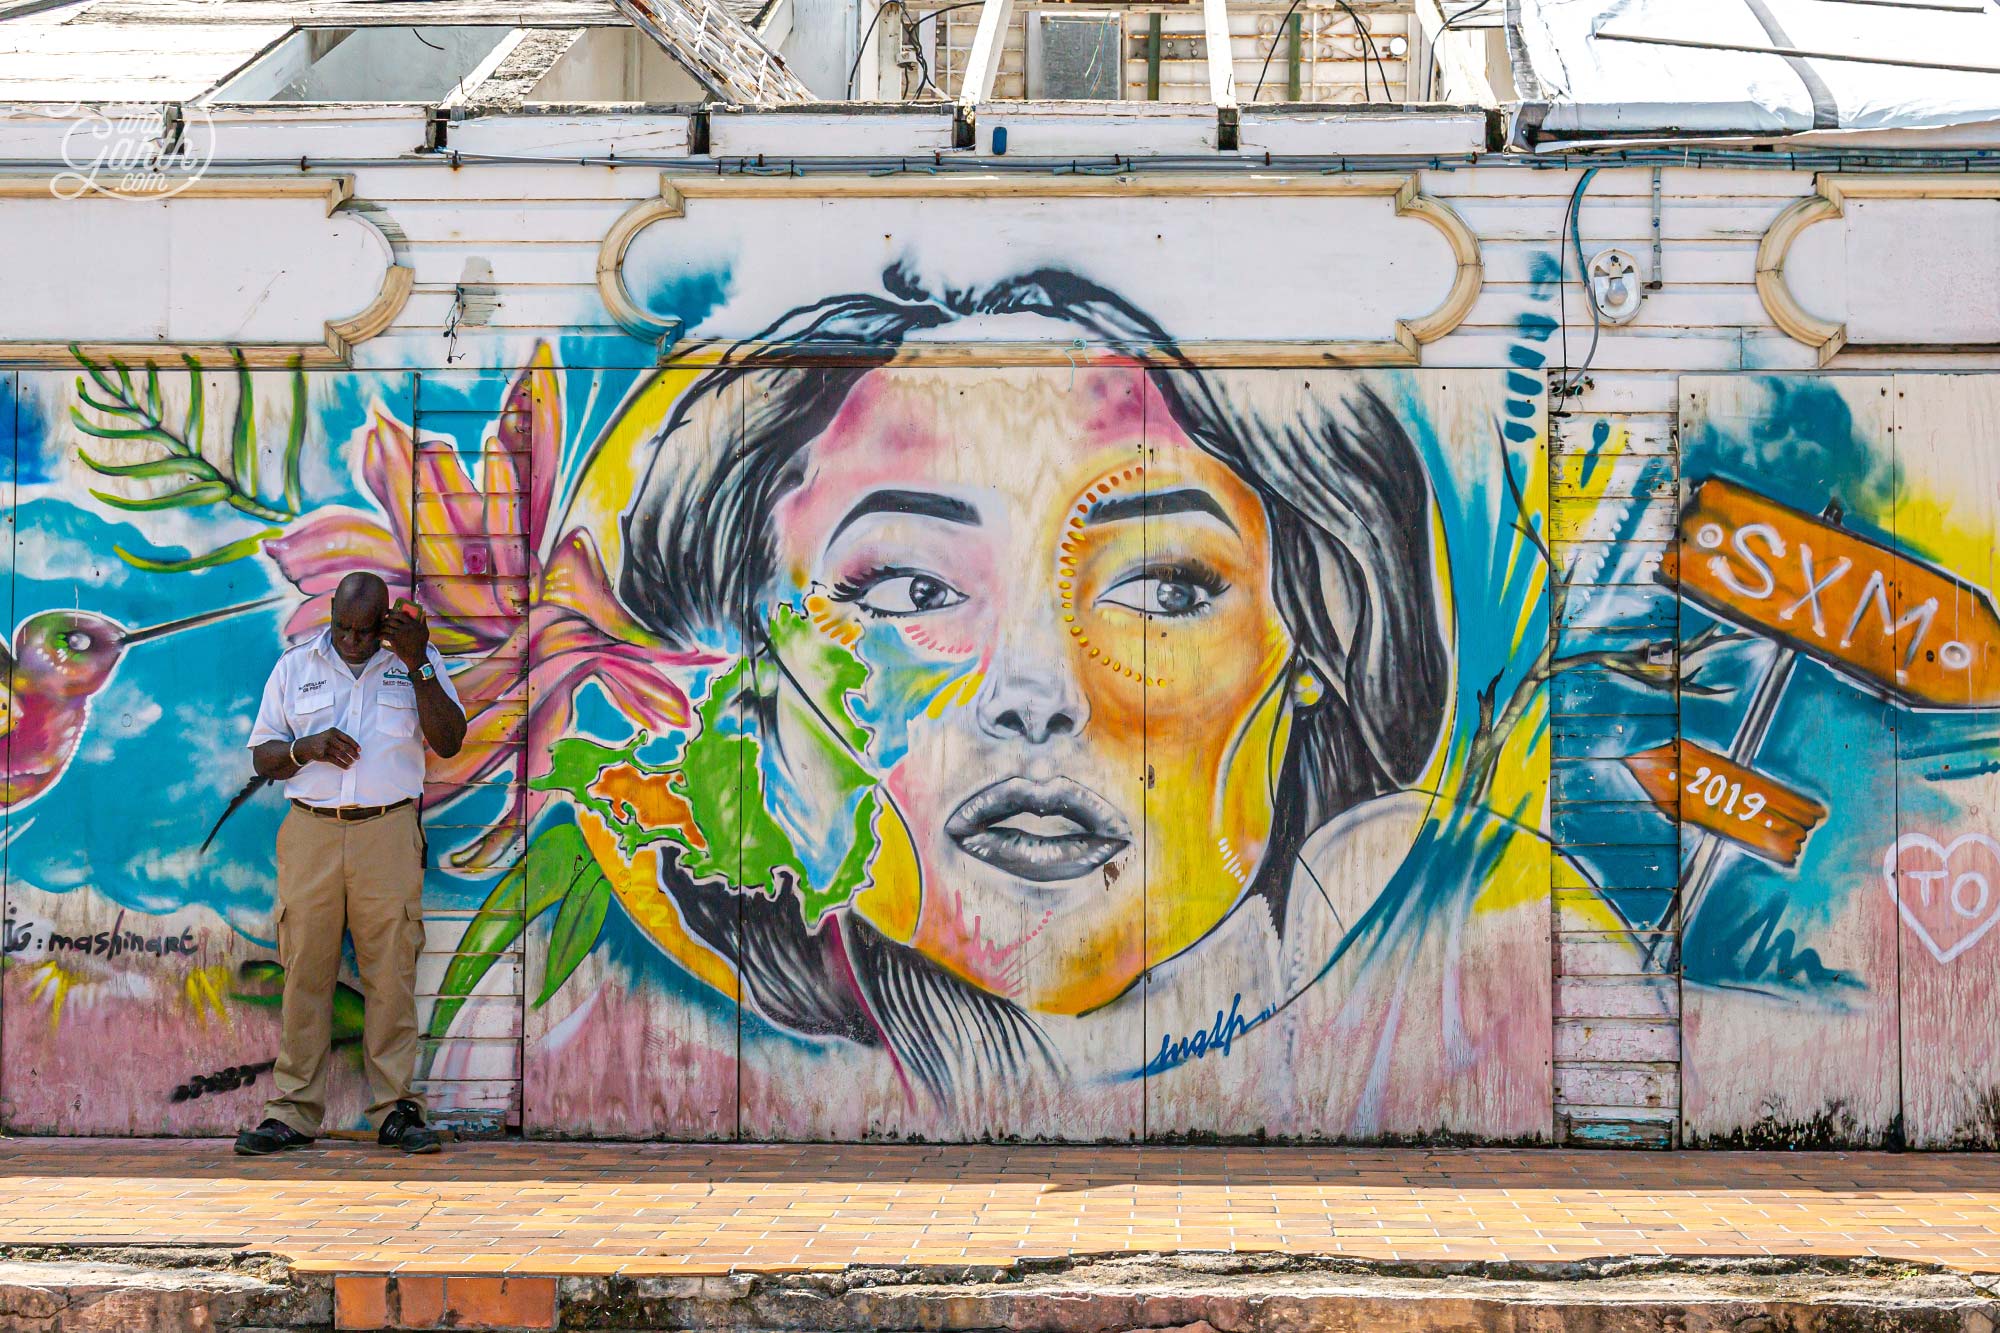 There's lots of street art to discover in Marigot